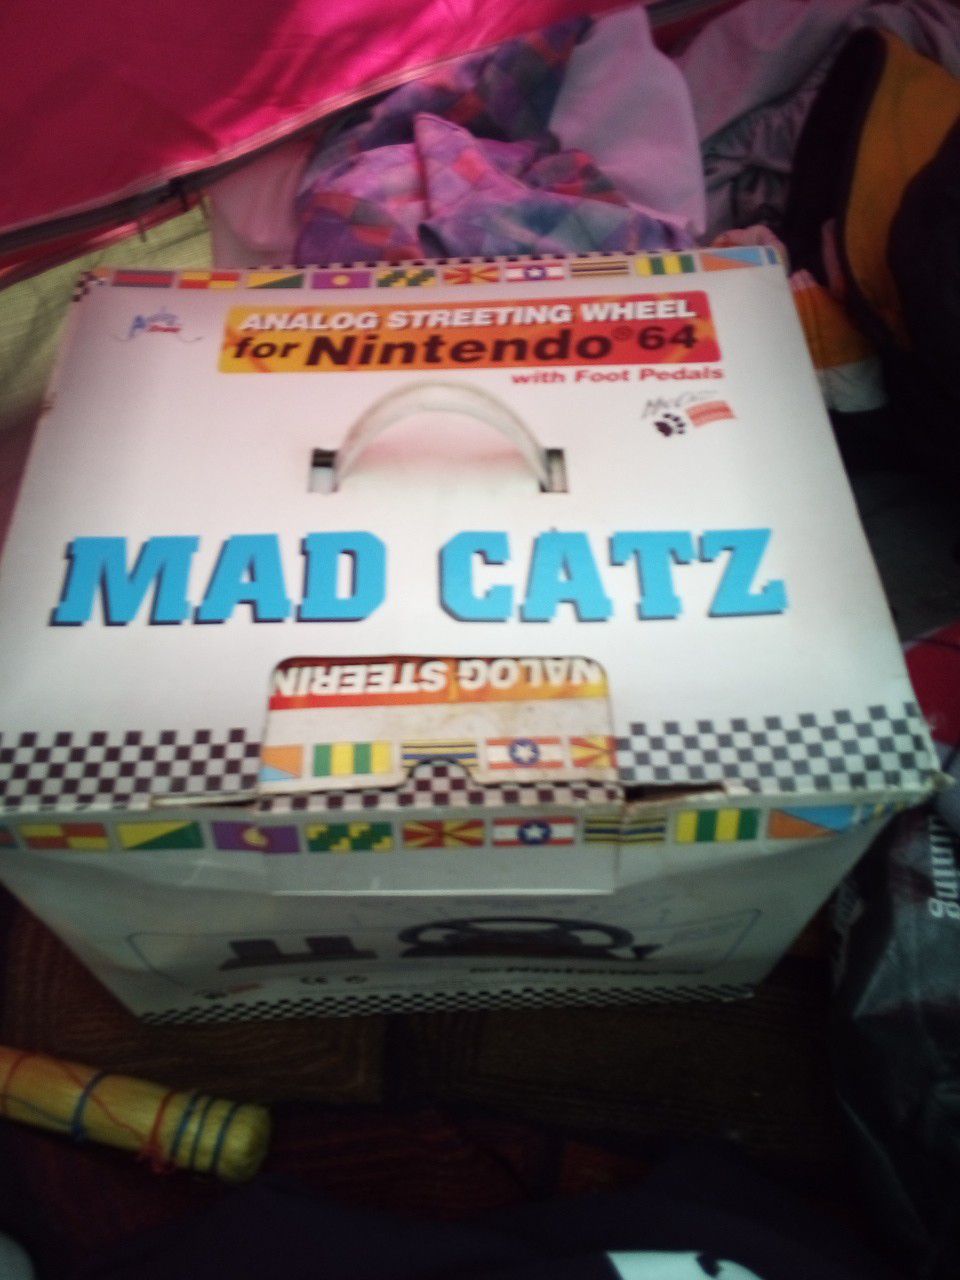 Mad Cats analog streeting wheel for Nintendo 64 with foot petals